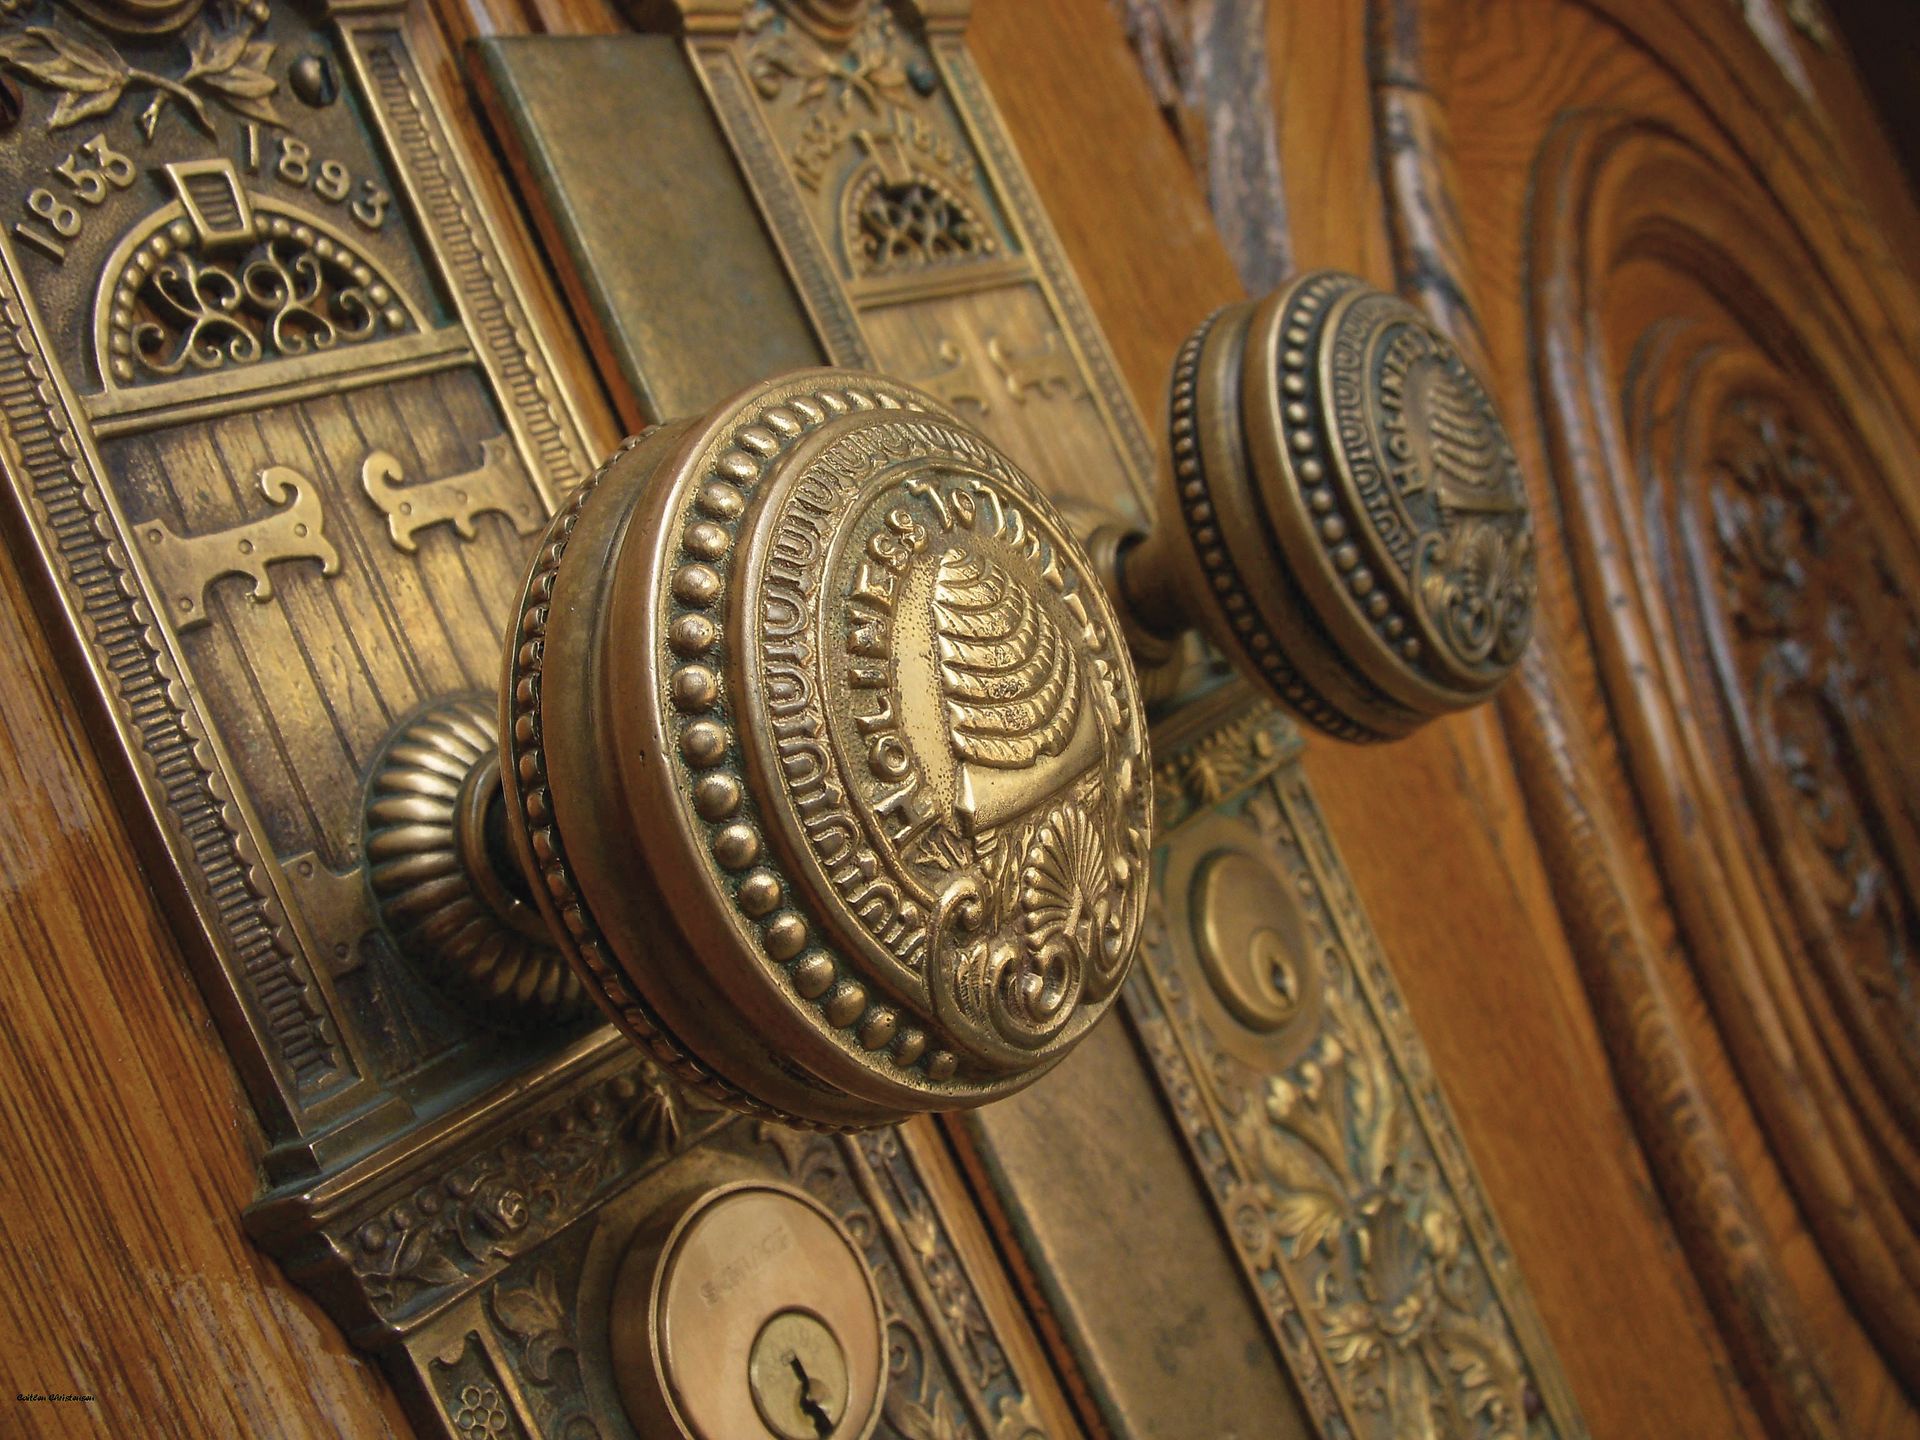 The Salt Lake Temple, including the temple doorknobs.